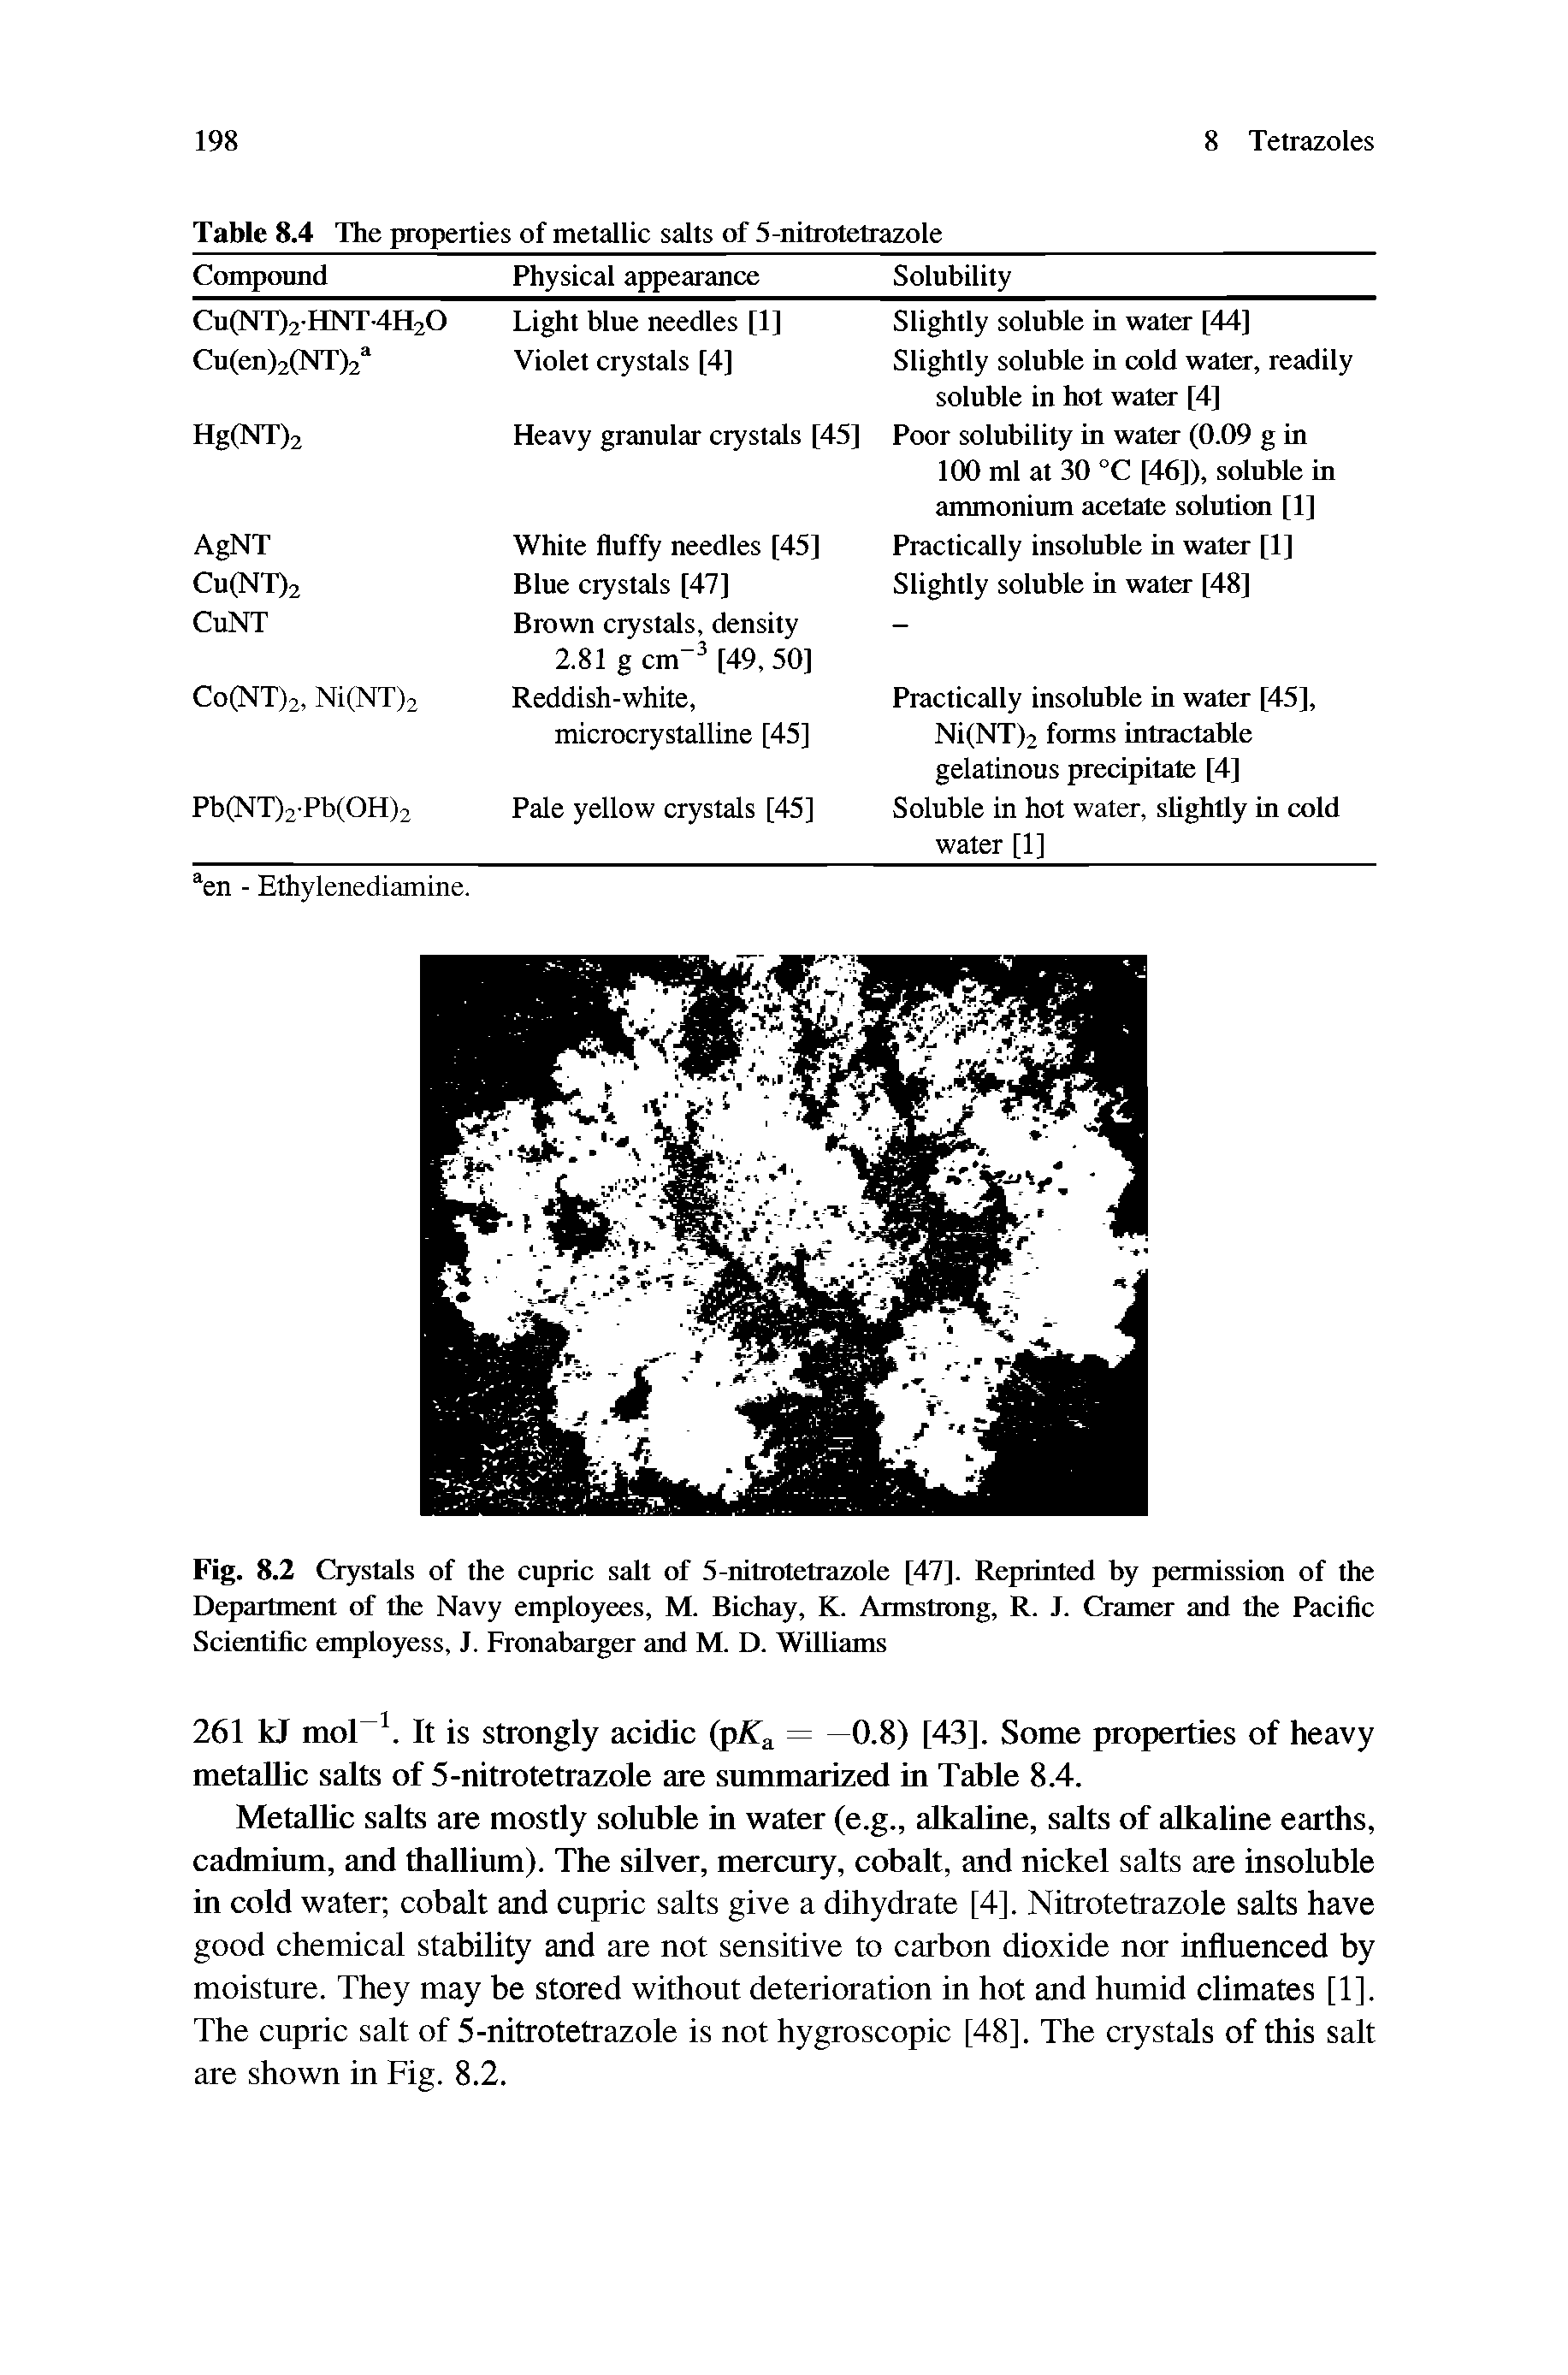 Fig. 8.2 Crystals of the cupric salt of 5-nitrotetrazole [47]. Reprinted by permission of the Department of the Navy employees, M. Bichay, K. Armstrong, R. J. Cramer and the Pacific Scientific employess, J. Fronabarger and M. D. Williams...